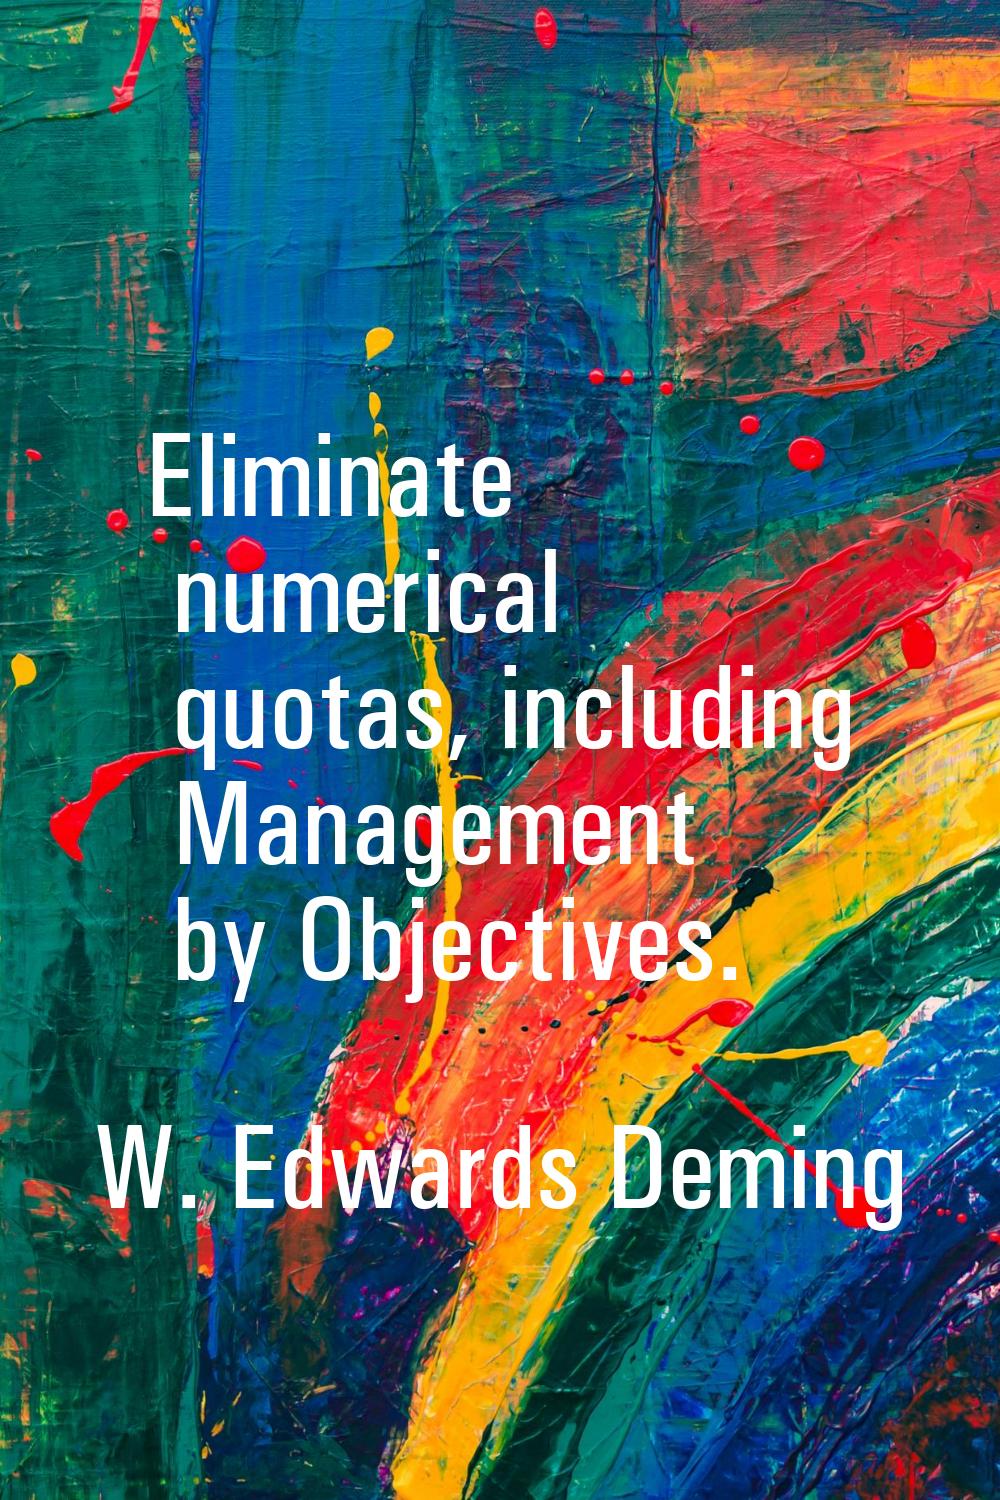 Eliminate numerical quotas, including Management by Objectives.